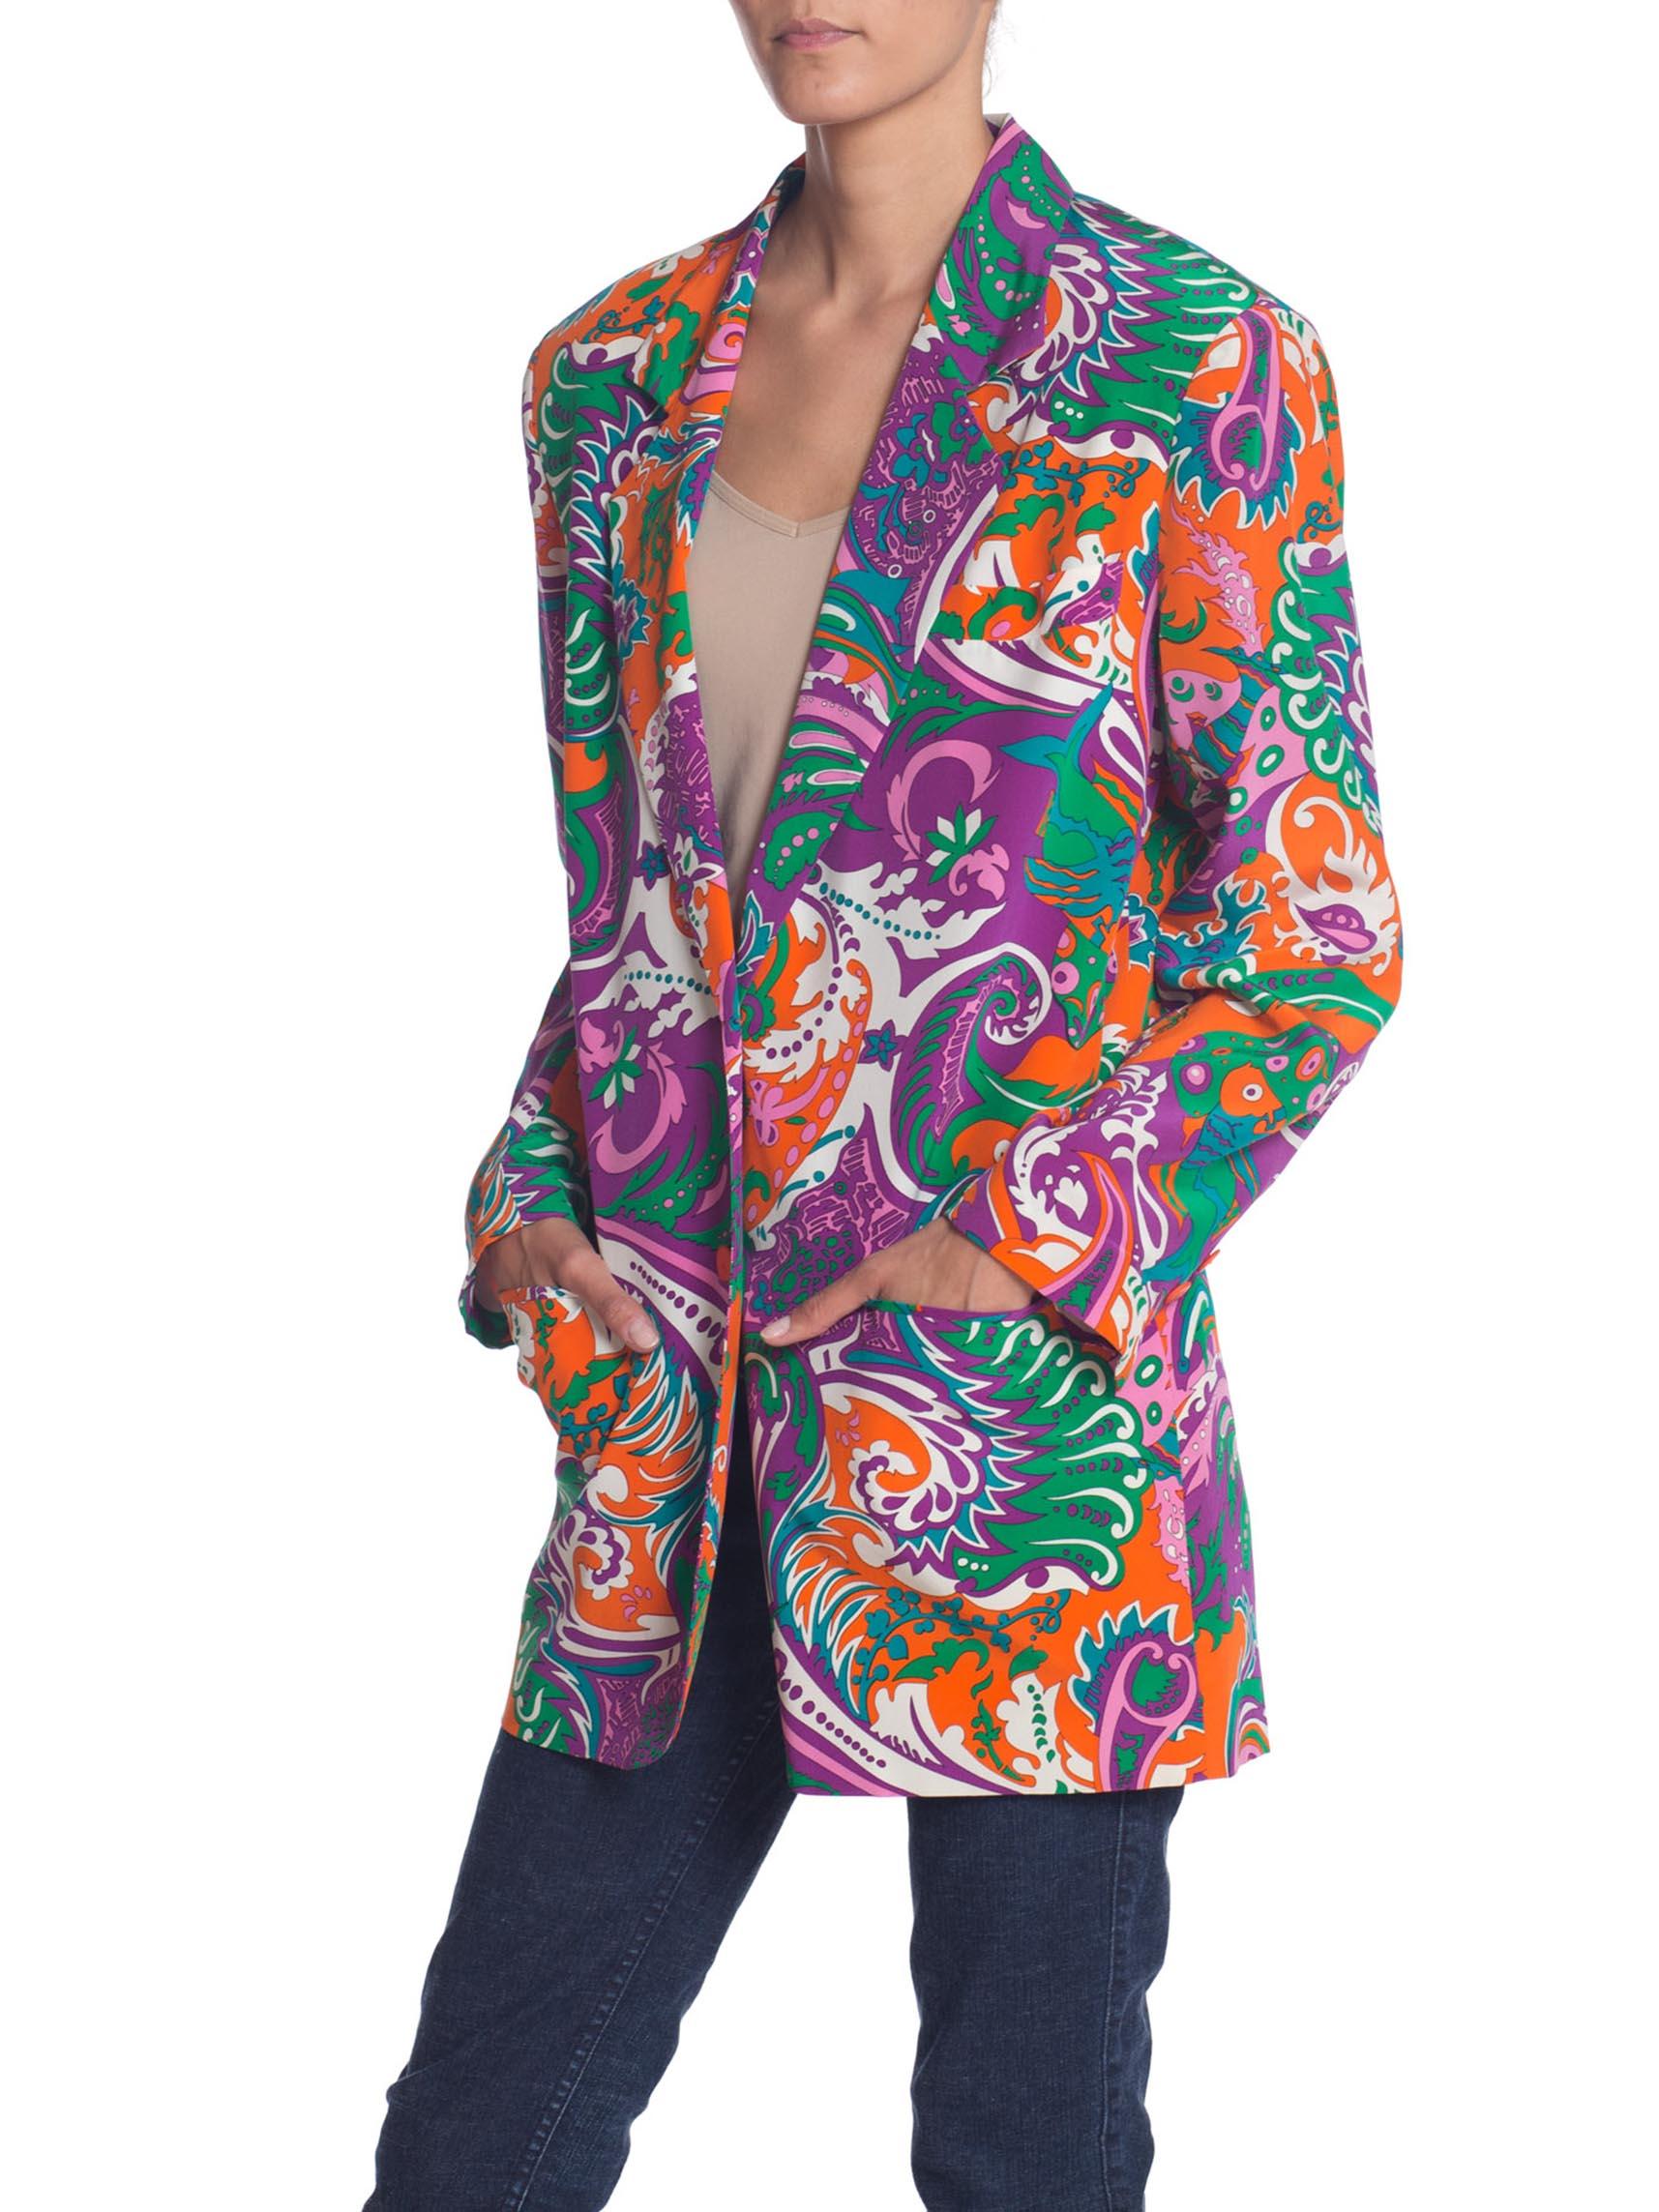 Women's 1980S PUCCI Style Silk Crepe De Chine Psychedelic Paisley Print Oversized Blazer